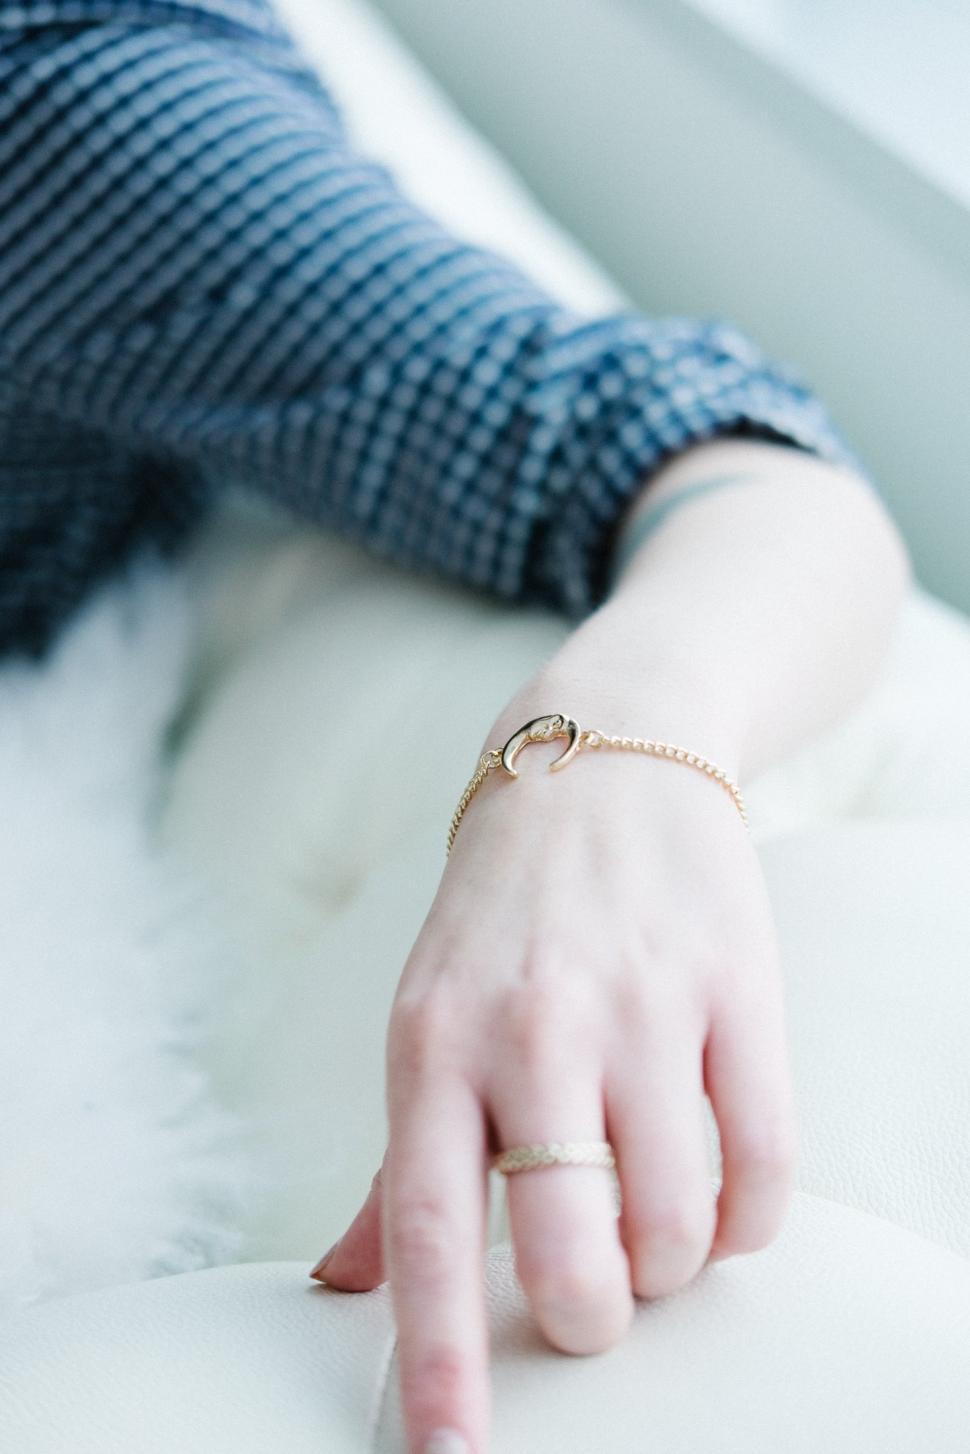 Free Image of A person wearing a gold bracelet 